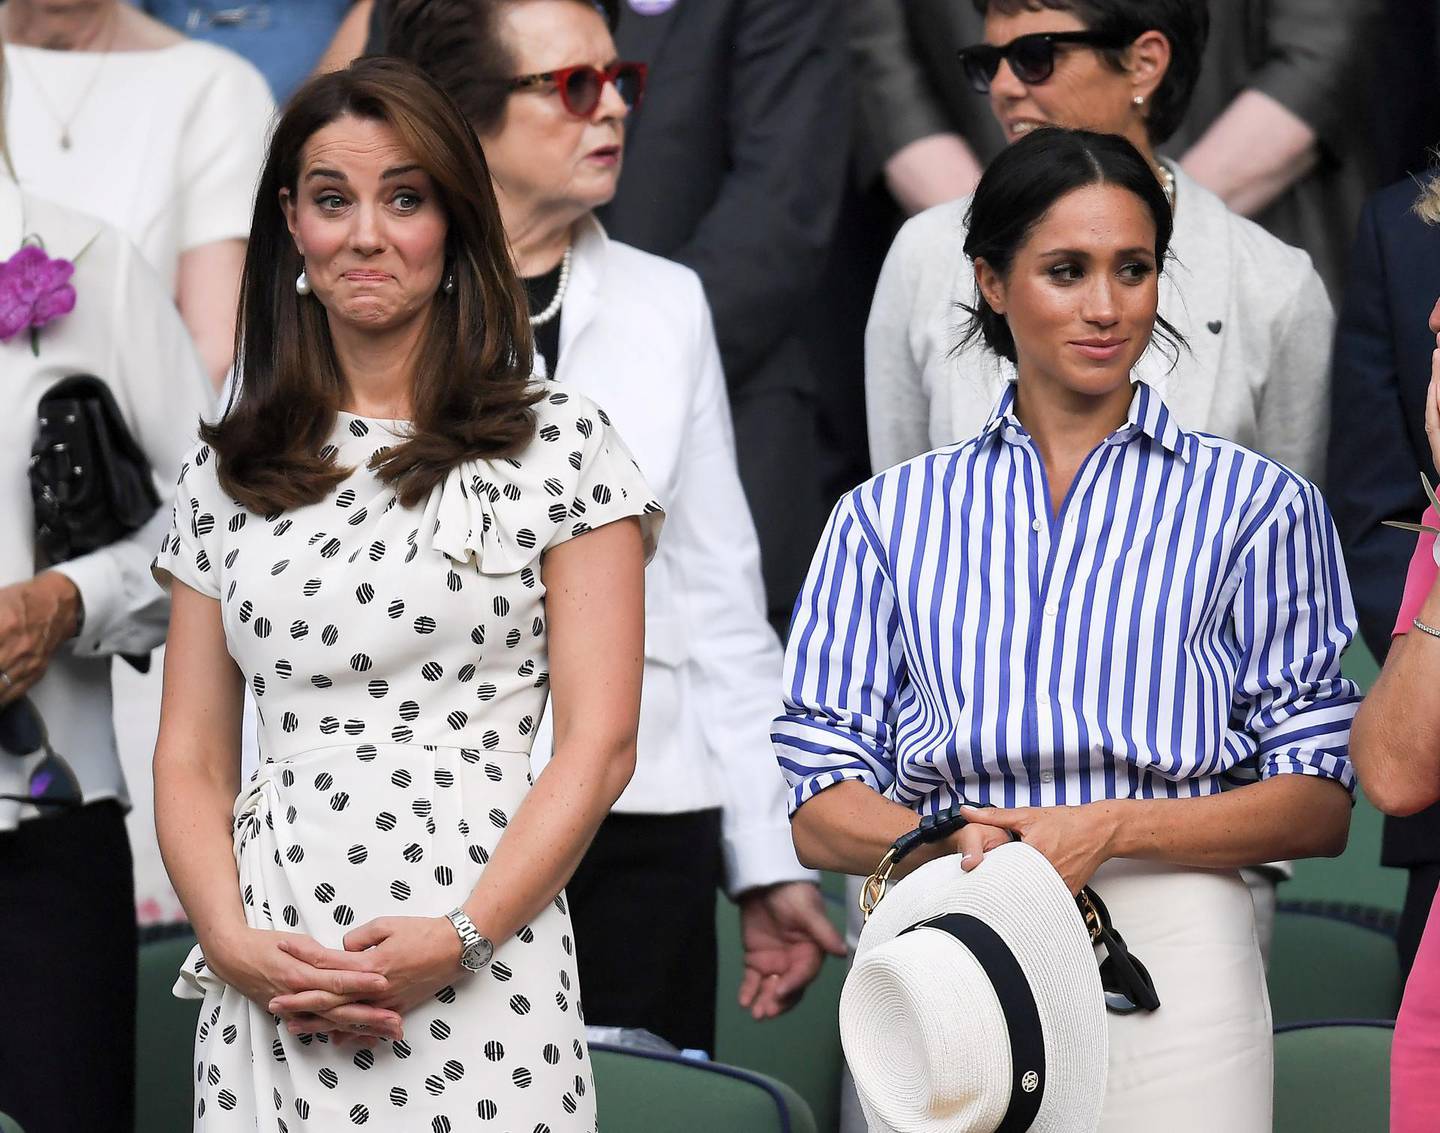 Mandatory Credit: Photo by James Gourley/BPI/REX/Shutterstock (9761460nm)
Catherine Duchess of Cambridge and Meghan Duchess of Sussex in the Royal Box
Wimbledon Tennis Championships, Day 12, The All England Lawn Tennis and Croquet Club, London, UK - 14 Jul 2018